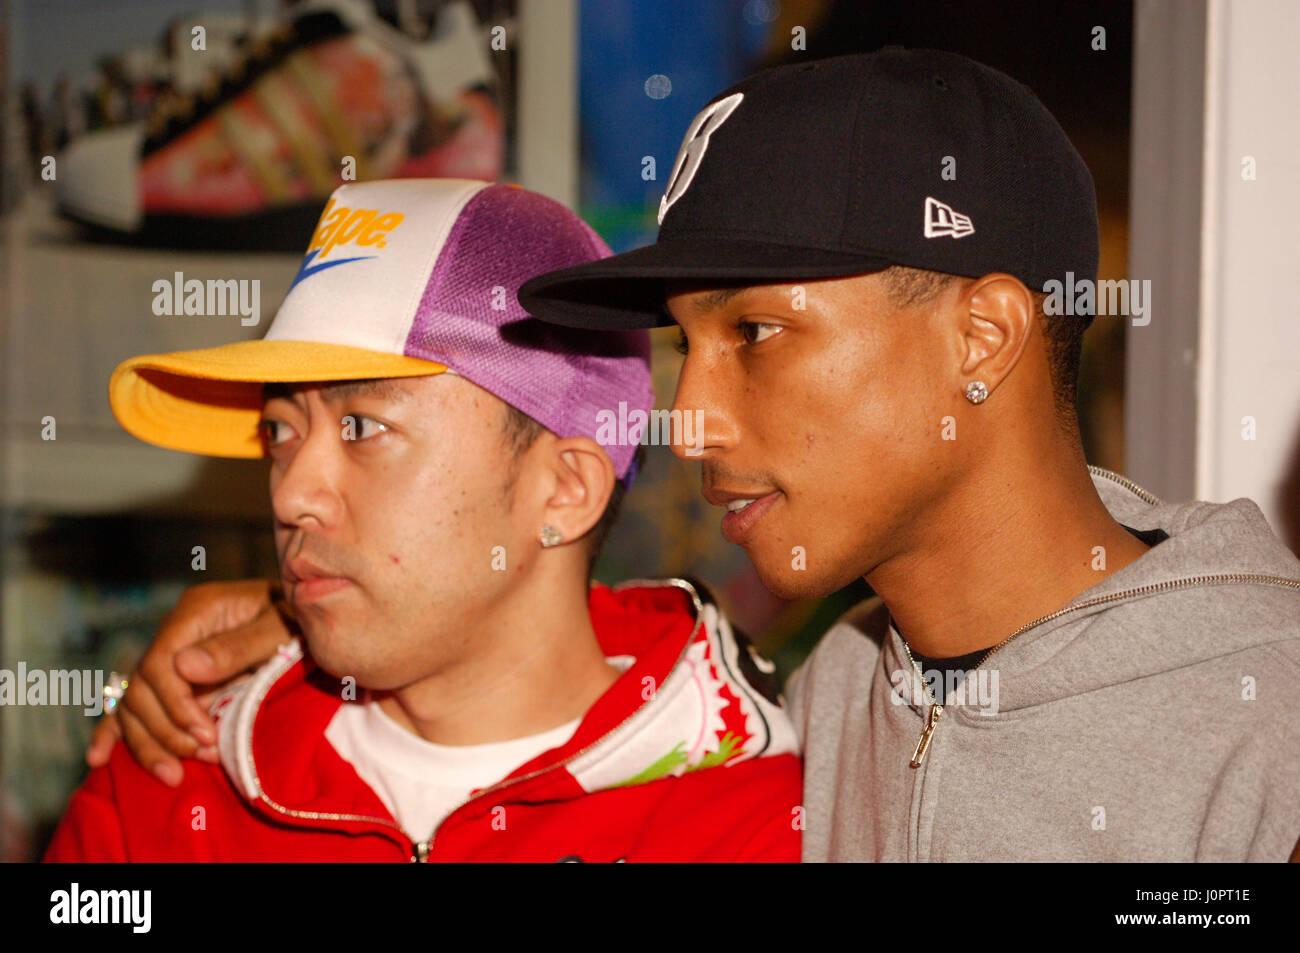 Pharrell Williams and designer Nigo at the launch of Pharrrell's new  footwear and apparel range at the Sanderson Hotel in London's West End. The  producer / artist of Neptunes and N.E.R.D, has